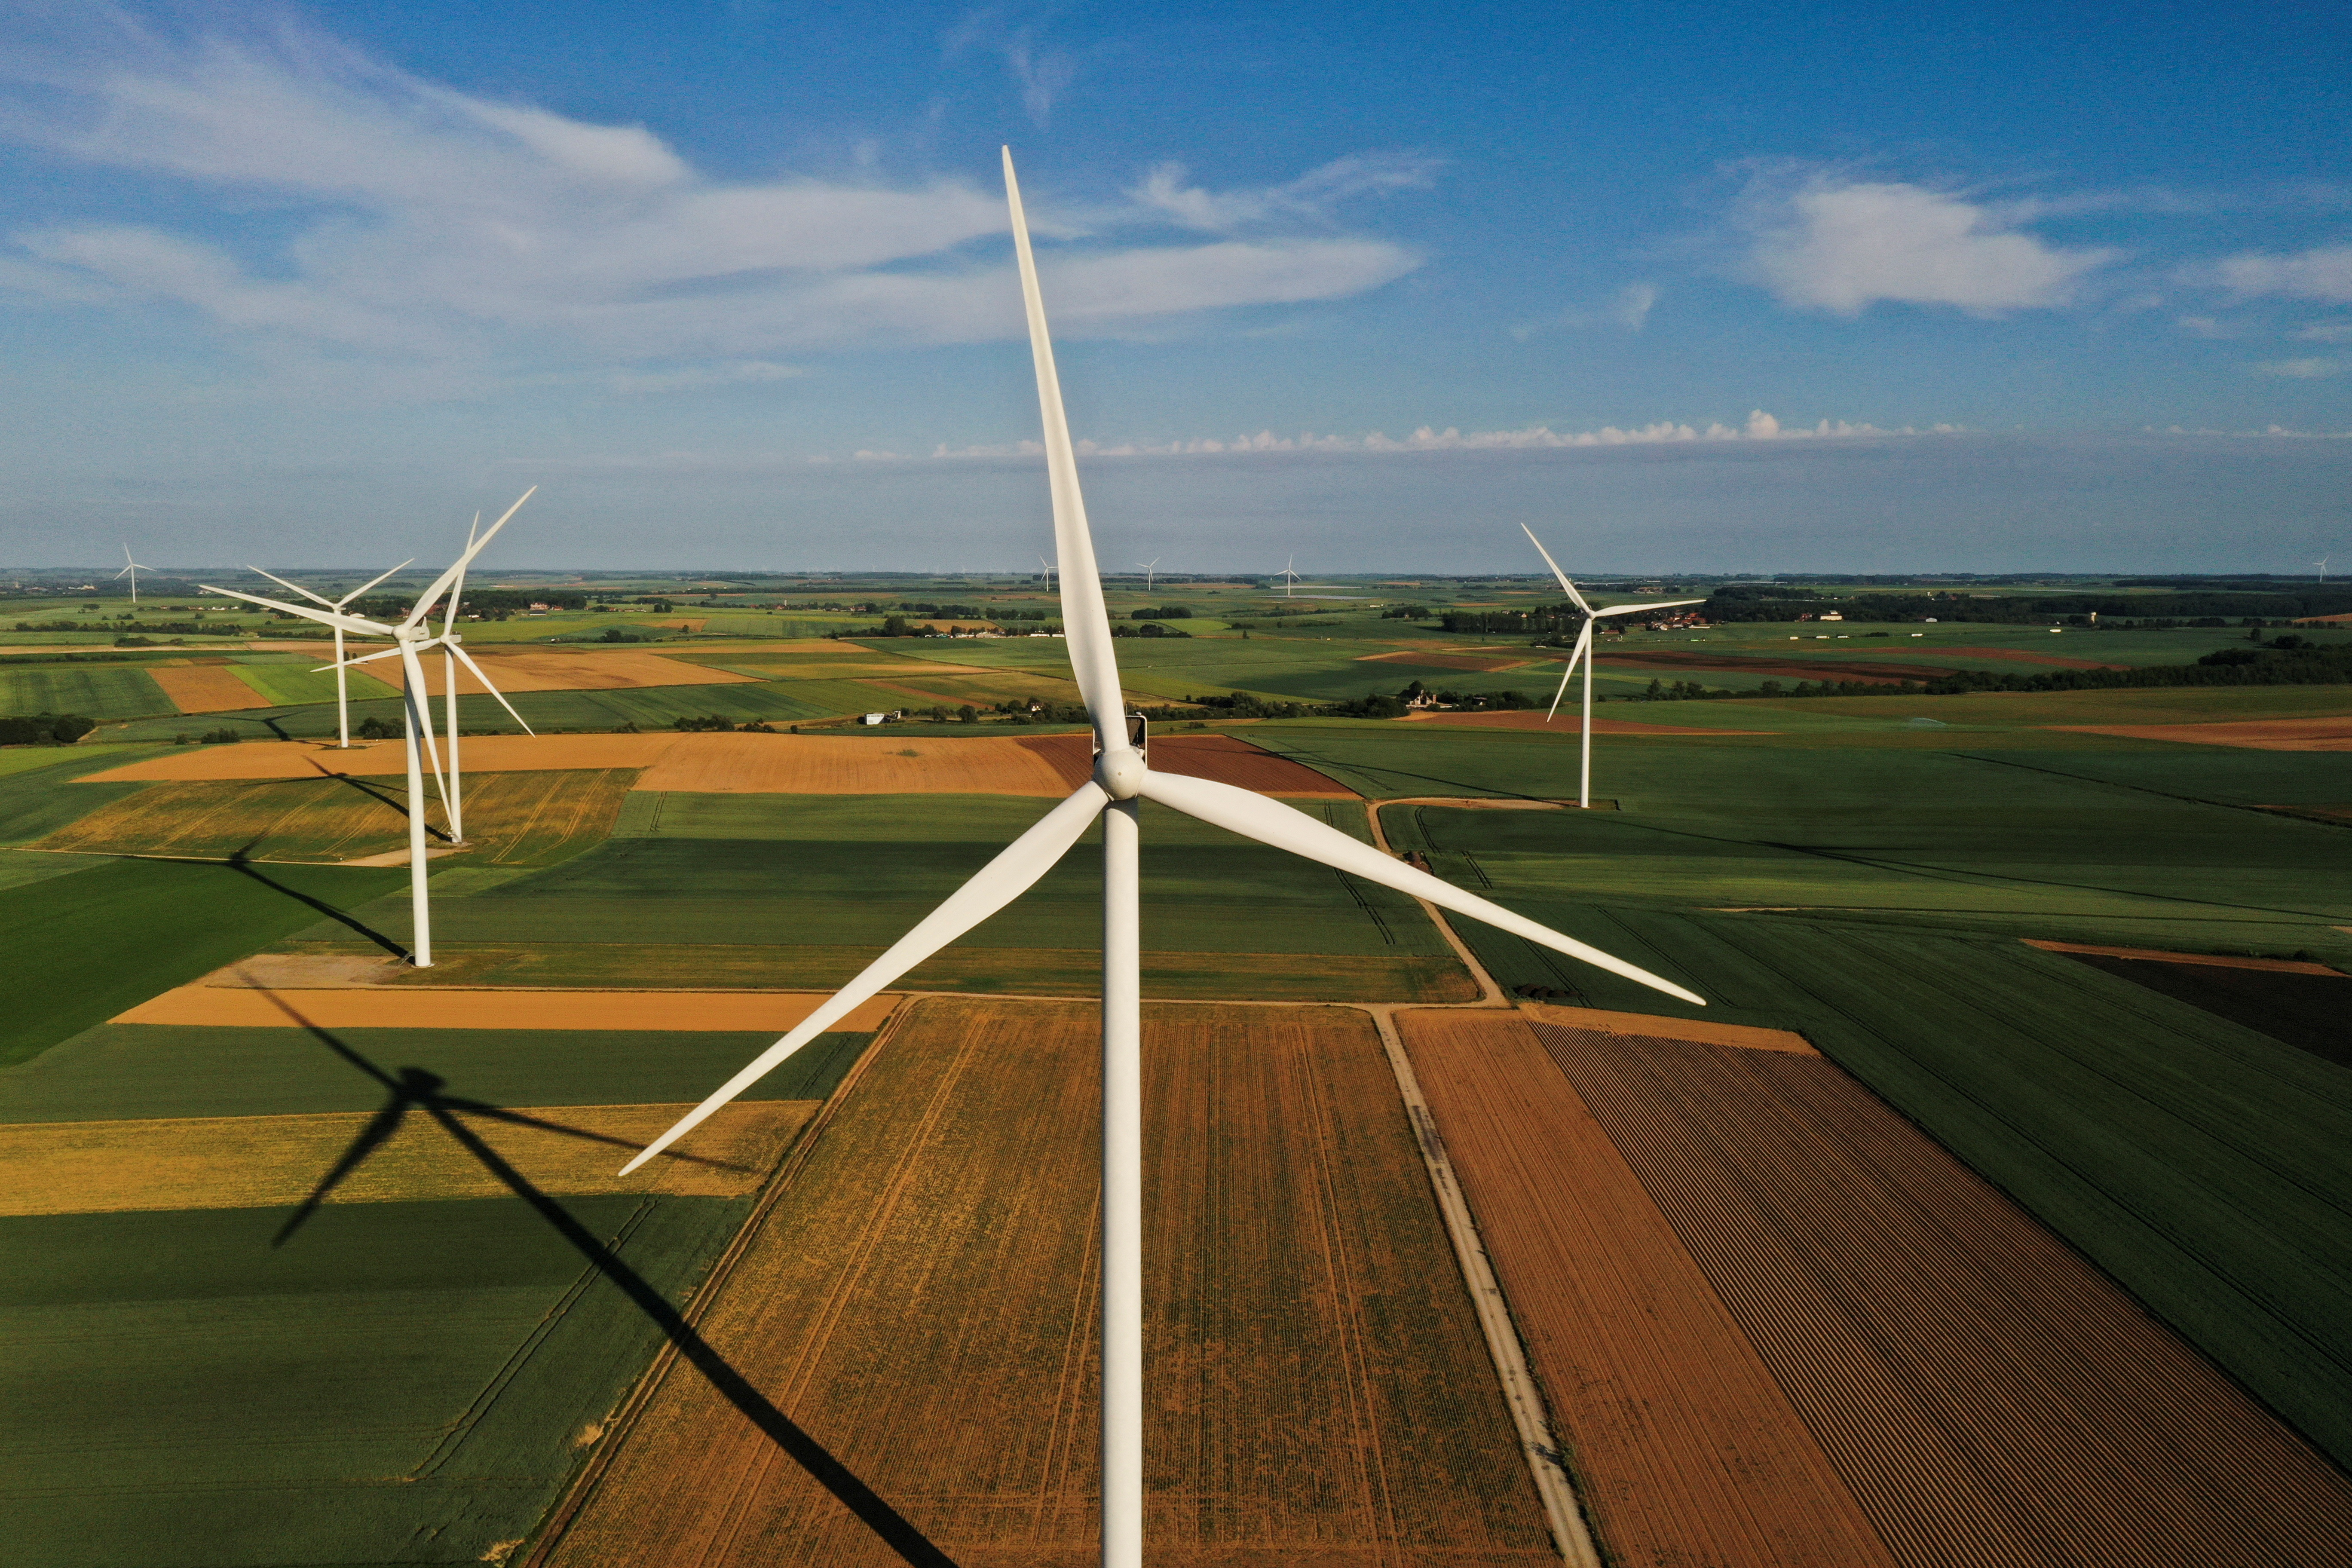 An aerial view shows power-generating windmill turbines in a wind farm in Graincourt-les-havrincourt